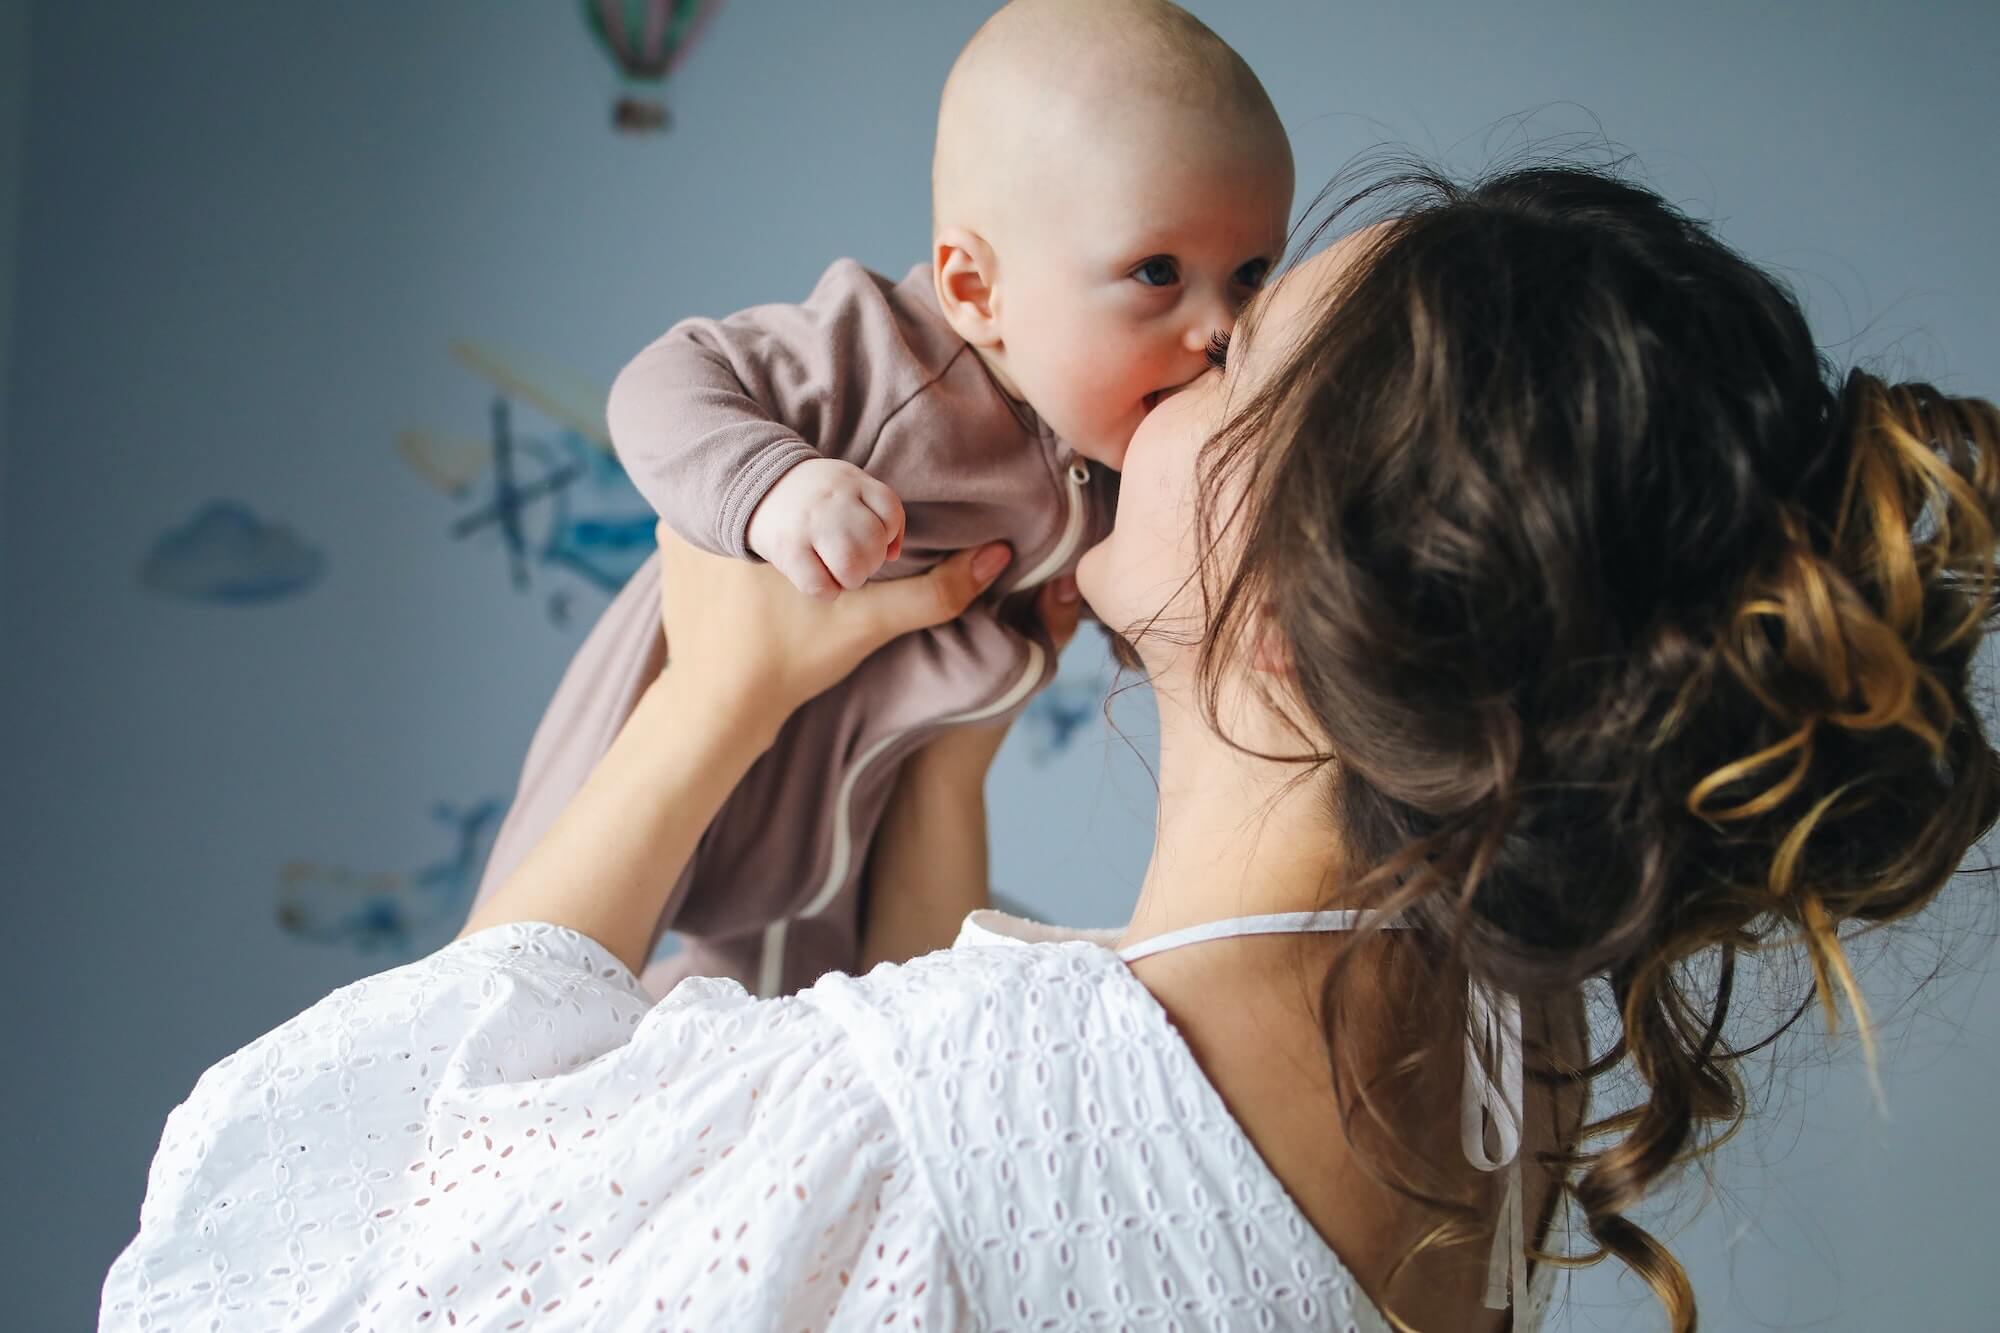 Building a Secure Attachment Bond with Your Baby